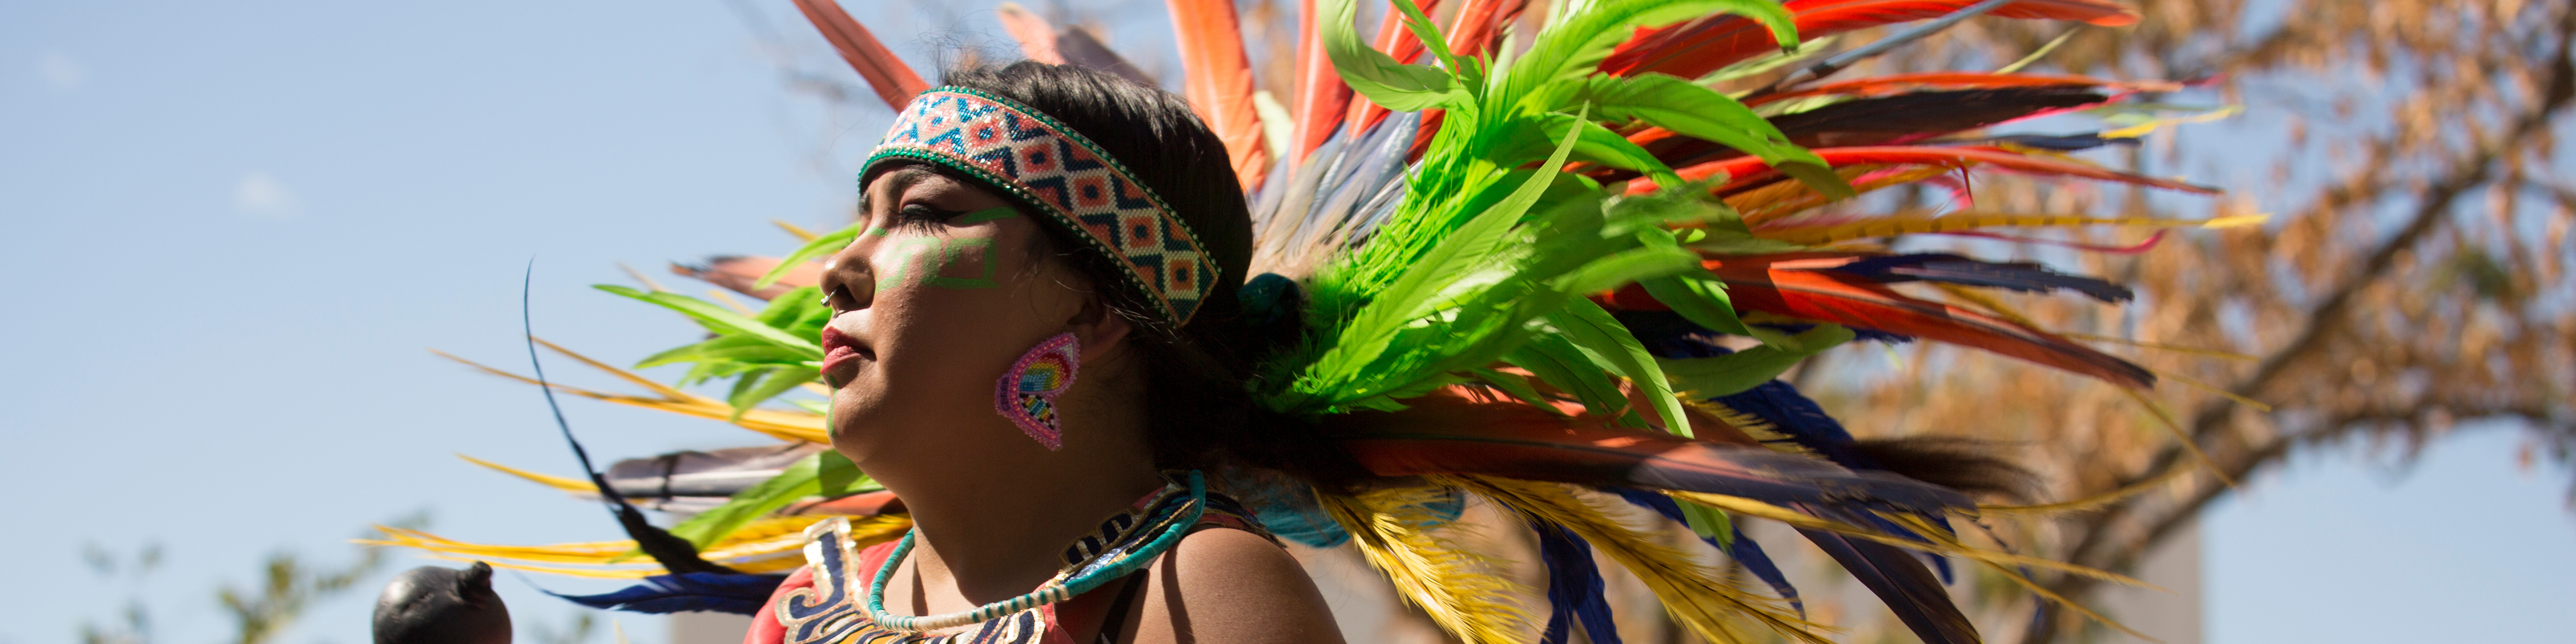 A Native American woman in a colorful headdress looks left during a celebration